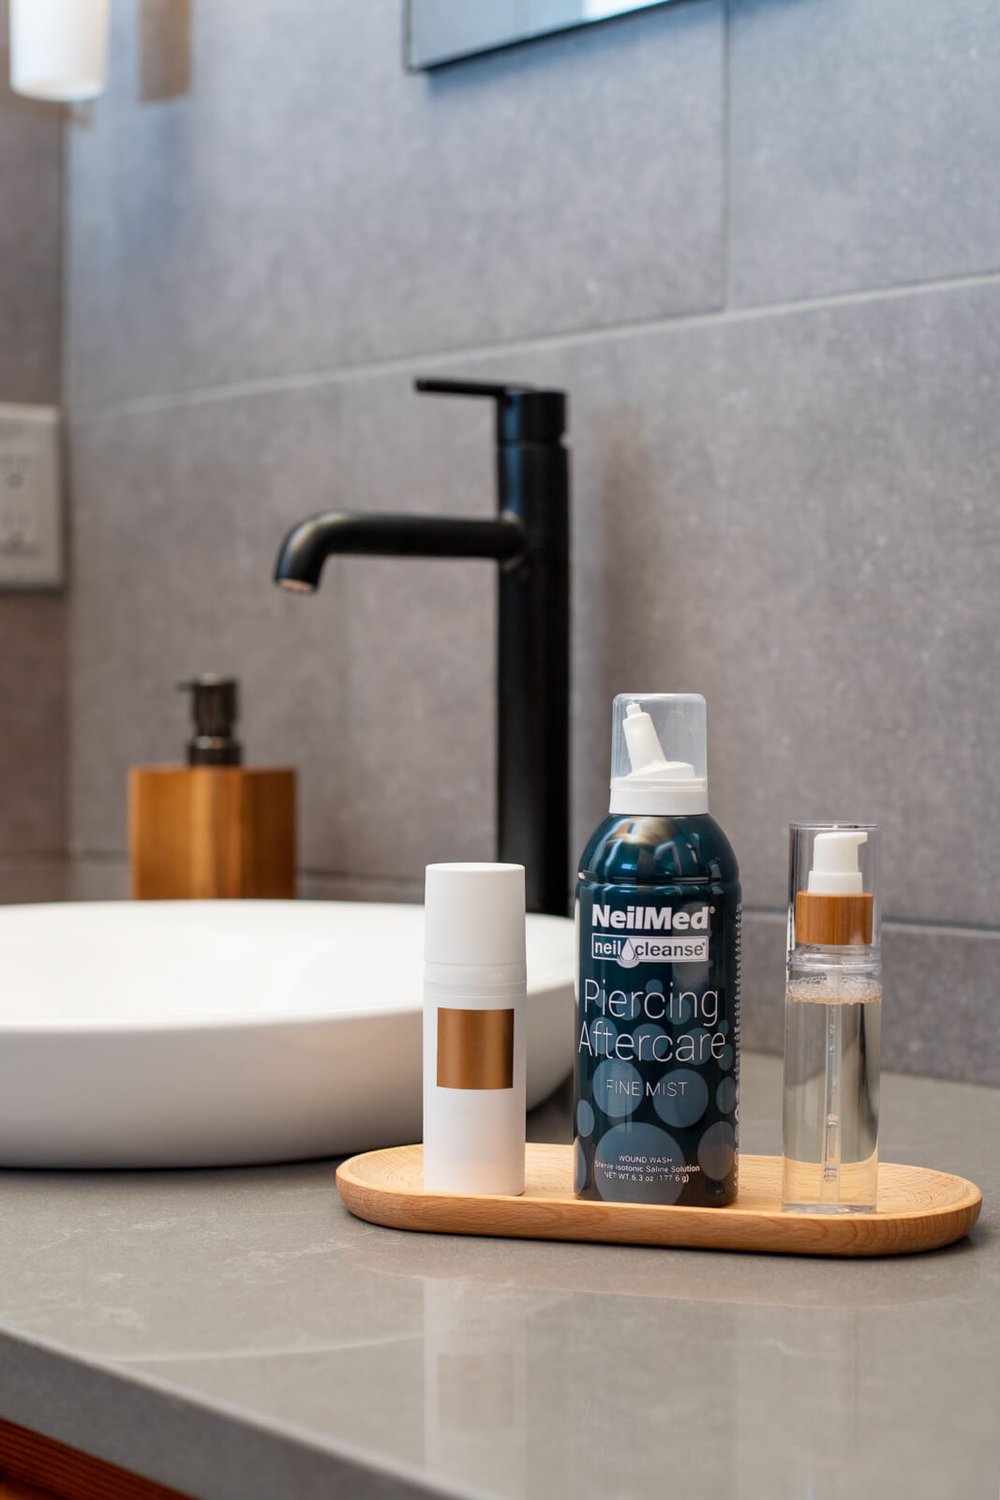 neilmed piercing and aftercare fine mist with other toiletries in modern bathroom